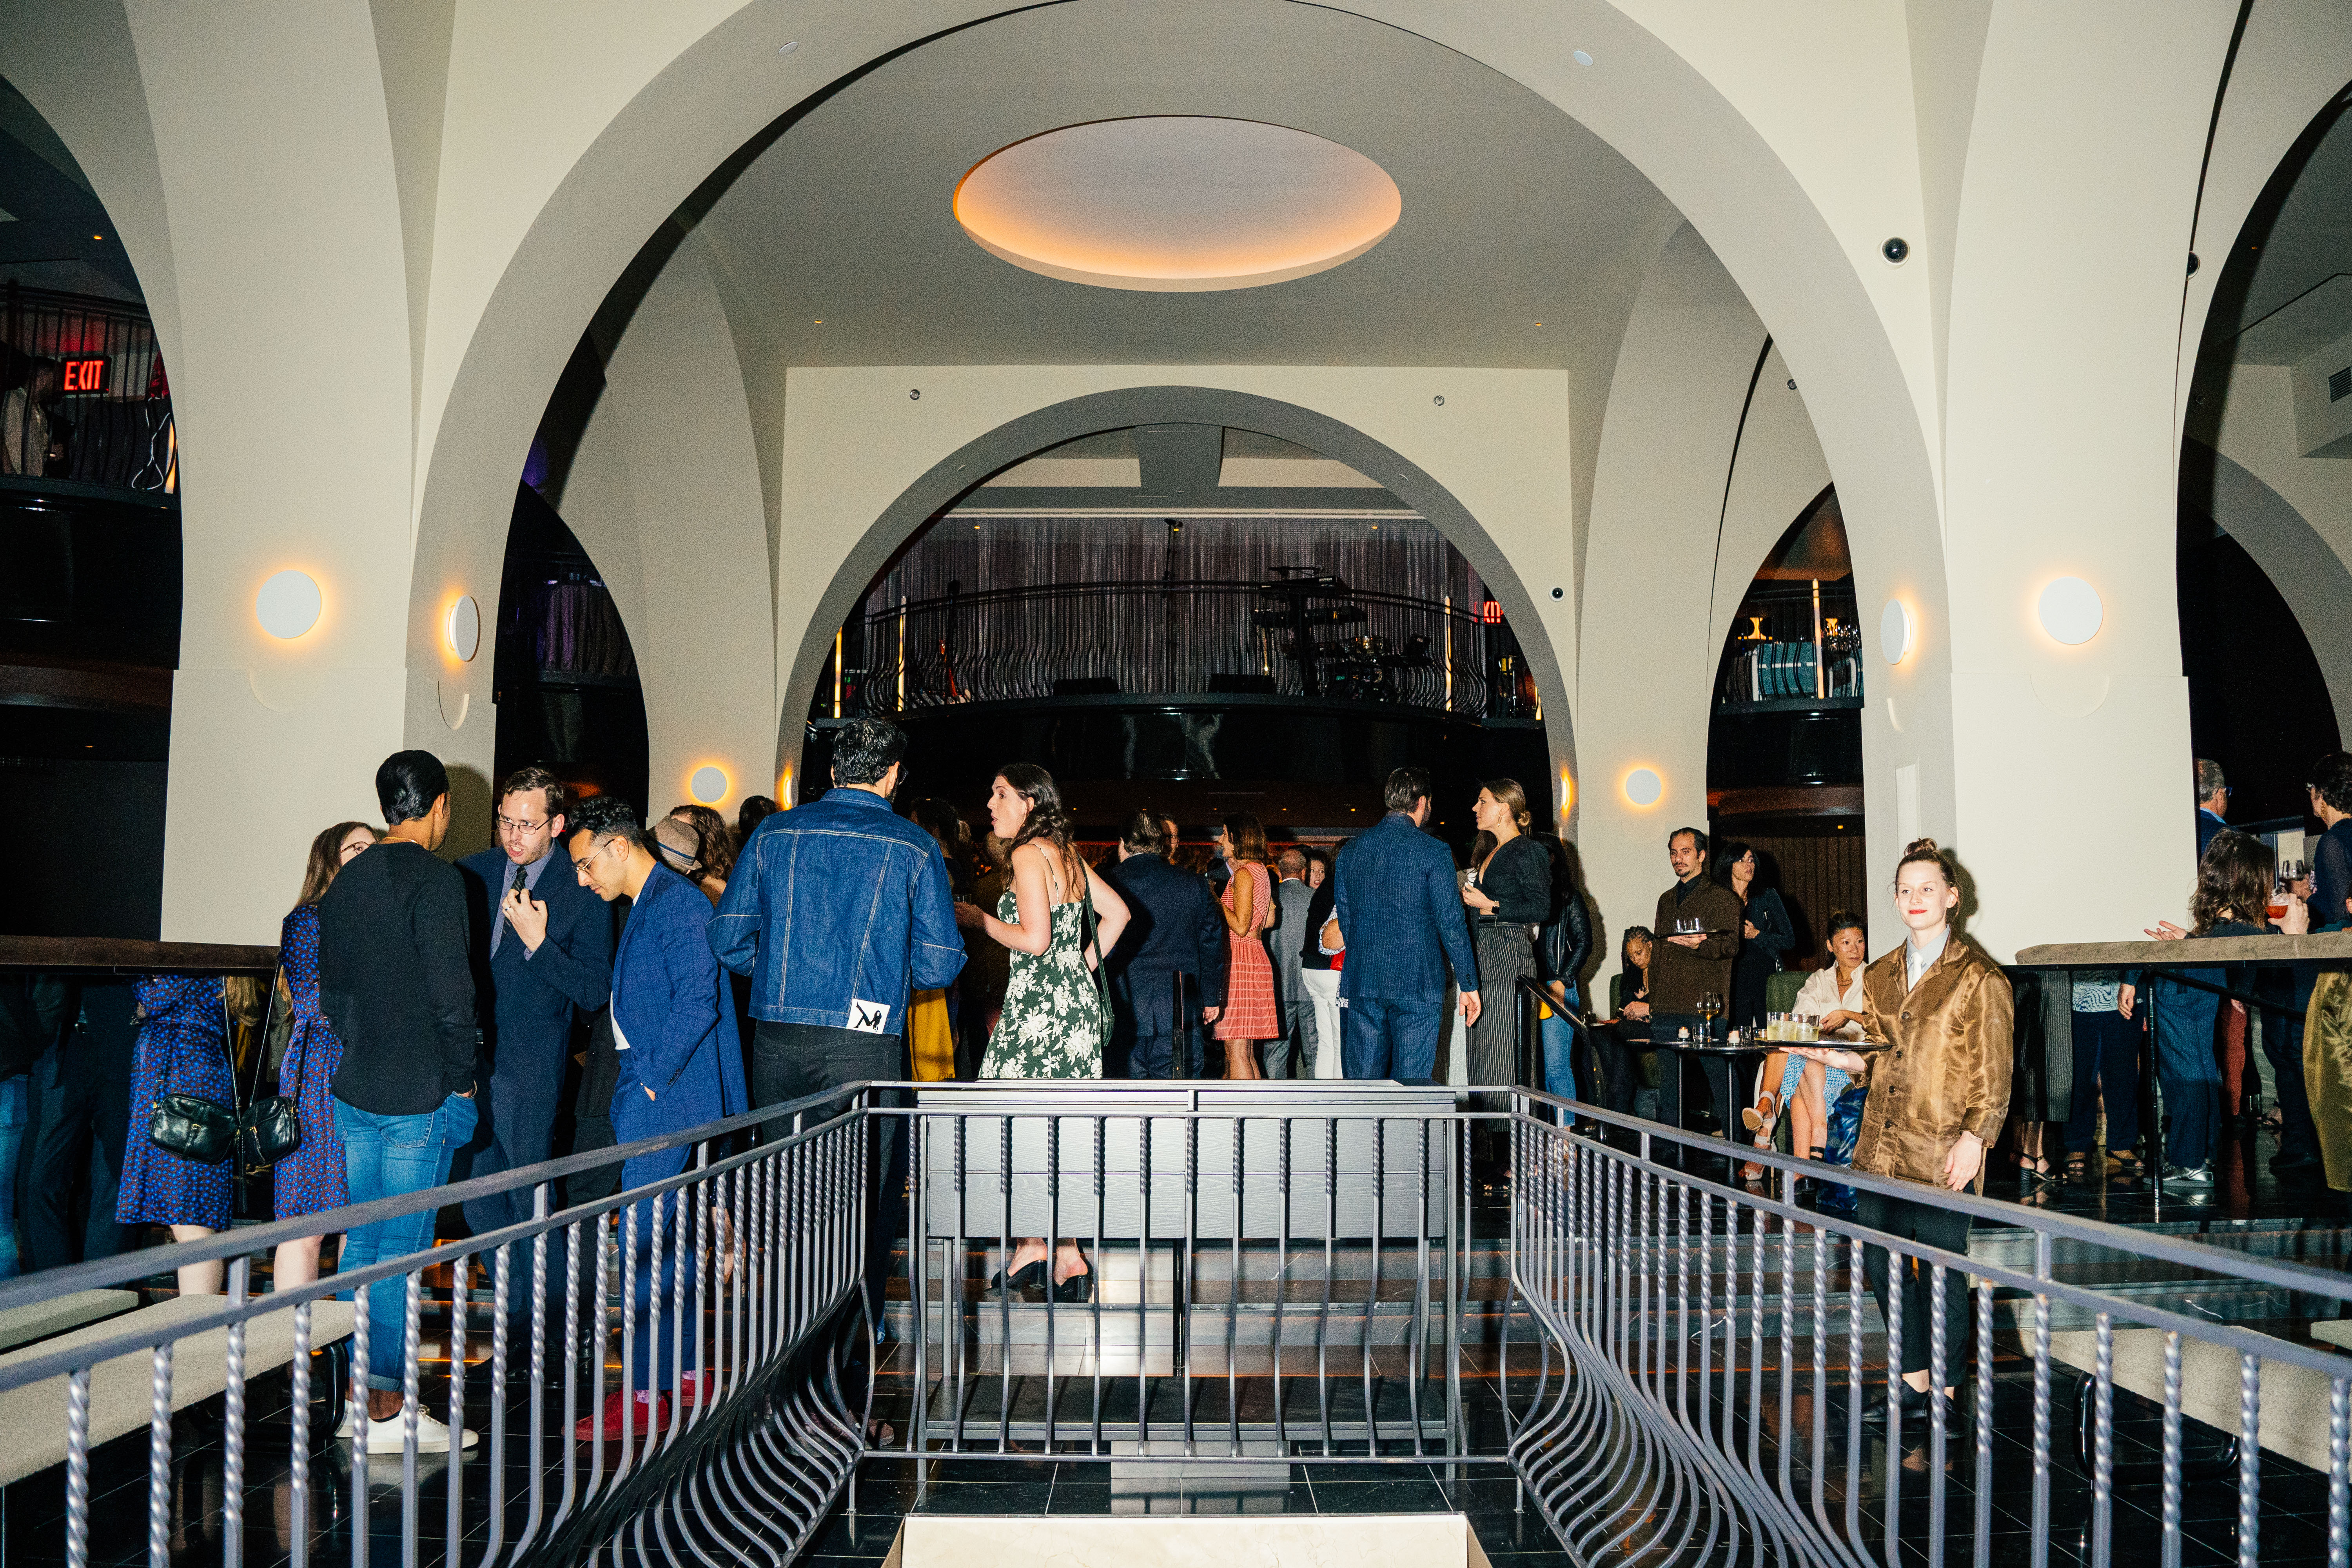 Well-dressed customers mingle in an arched dining room with a stage in the background.